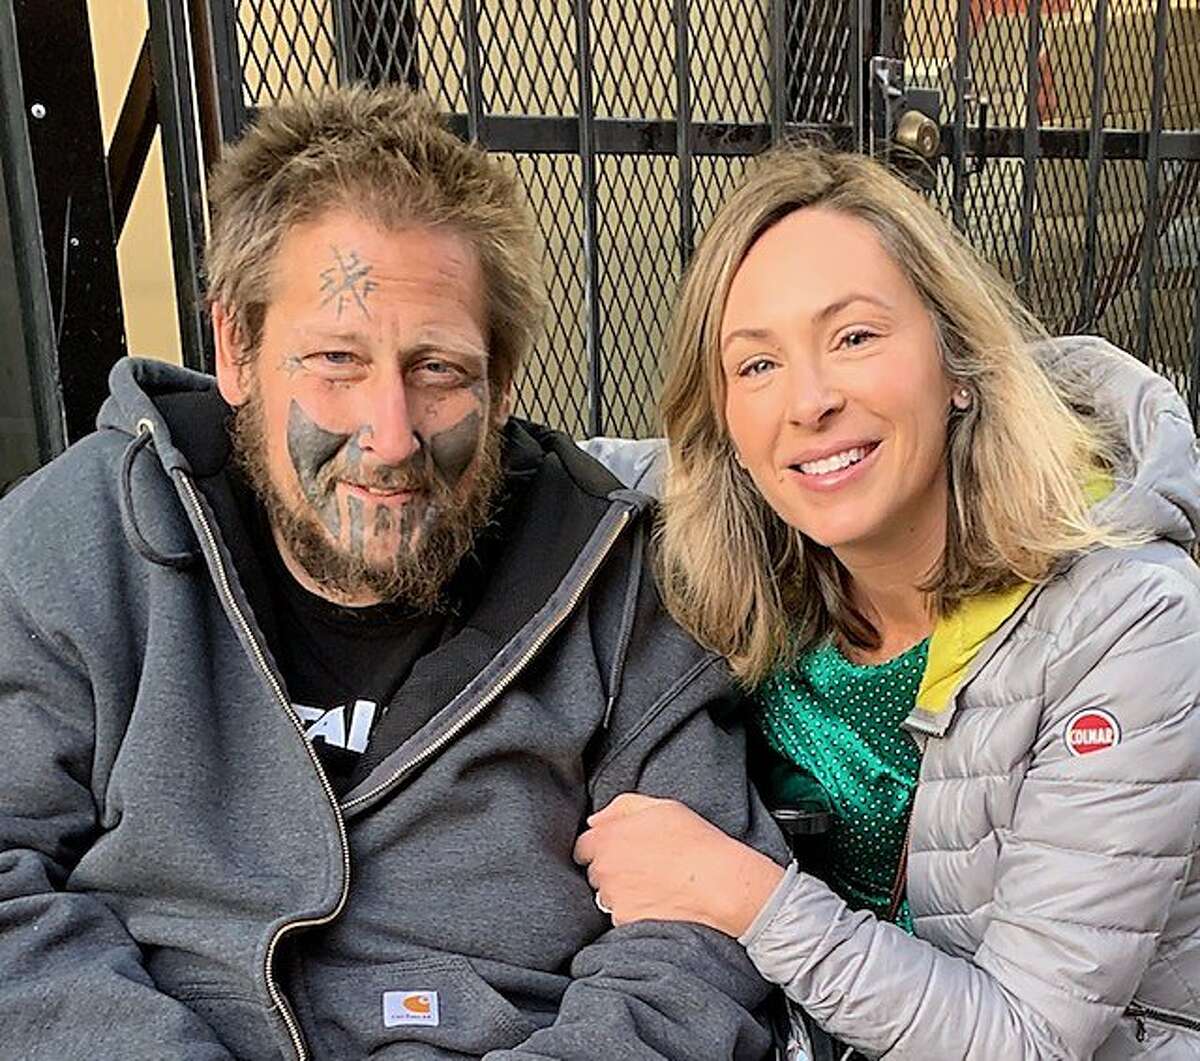 Ian Carrier and his sister, April Slone, in San Francisco in October, 2019.